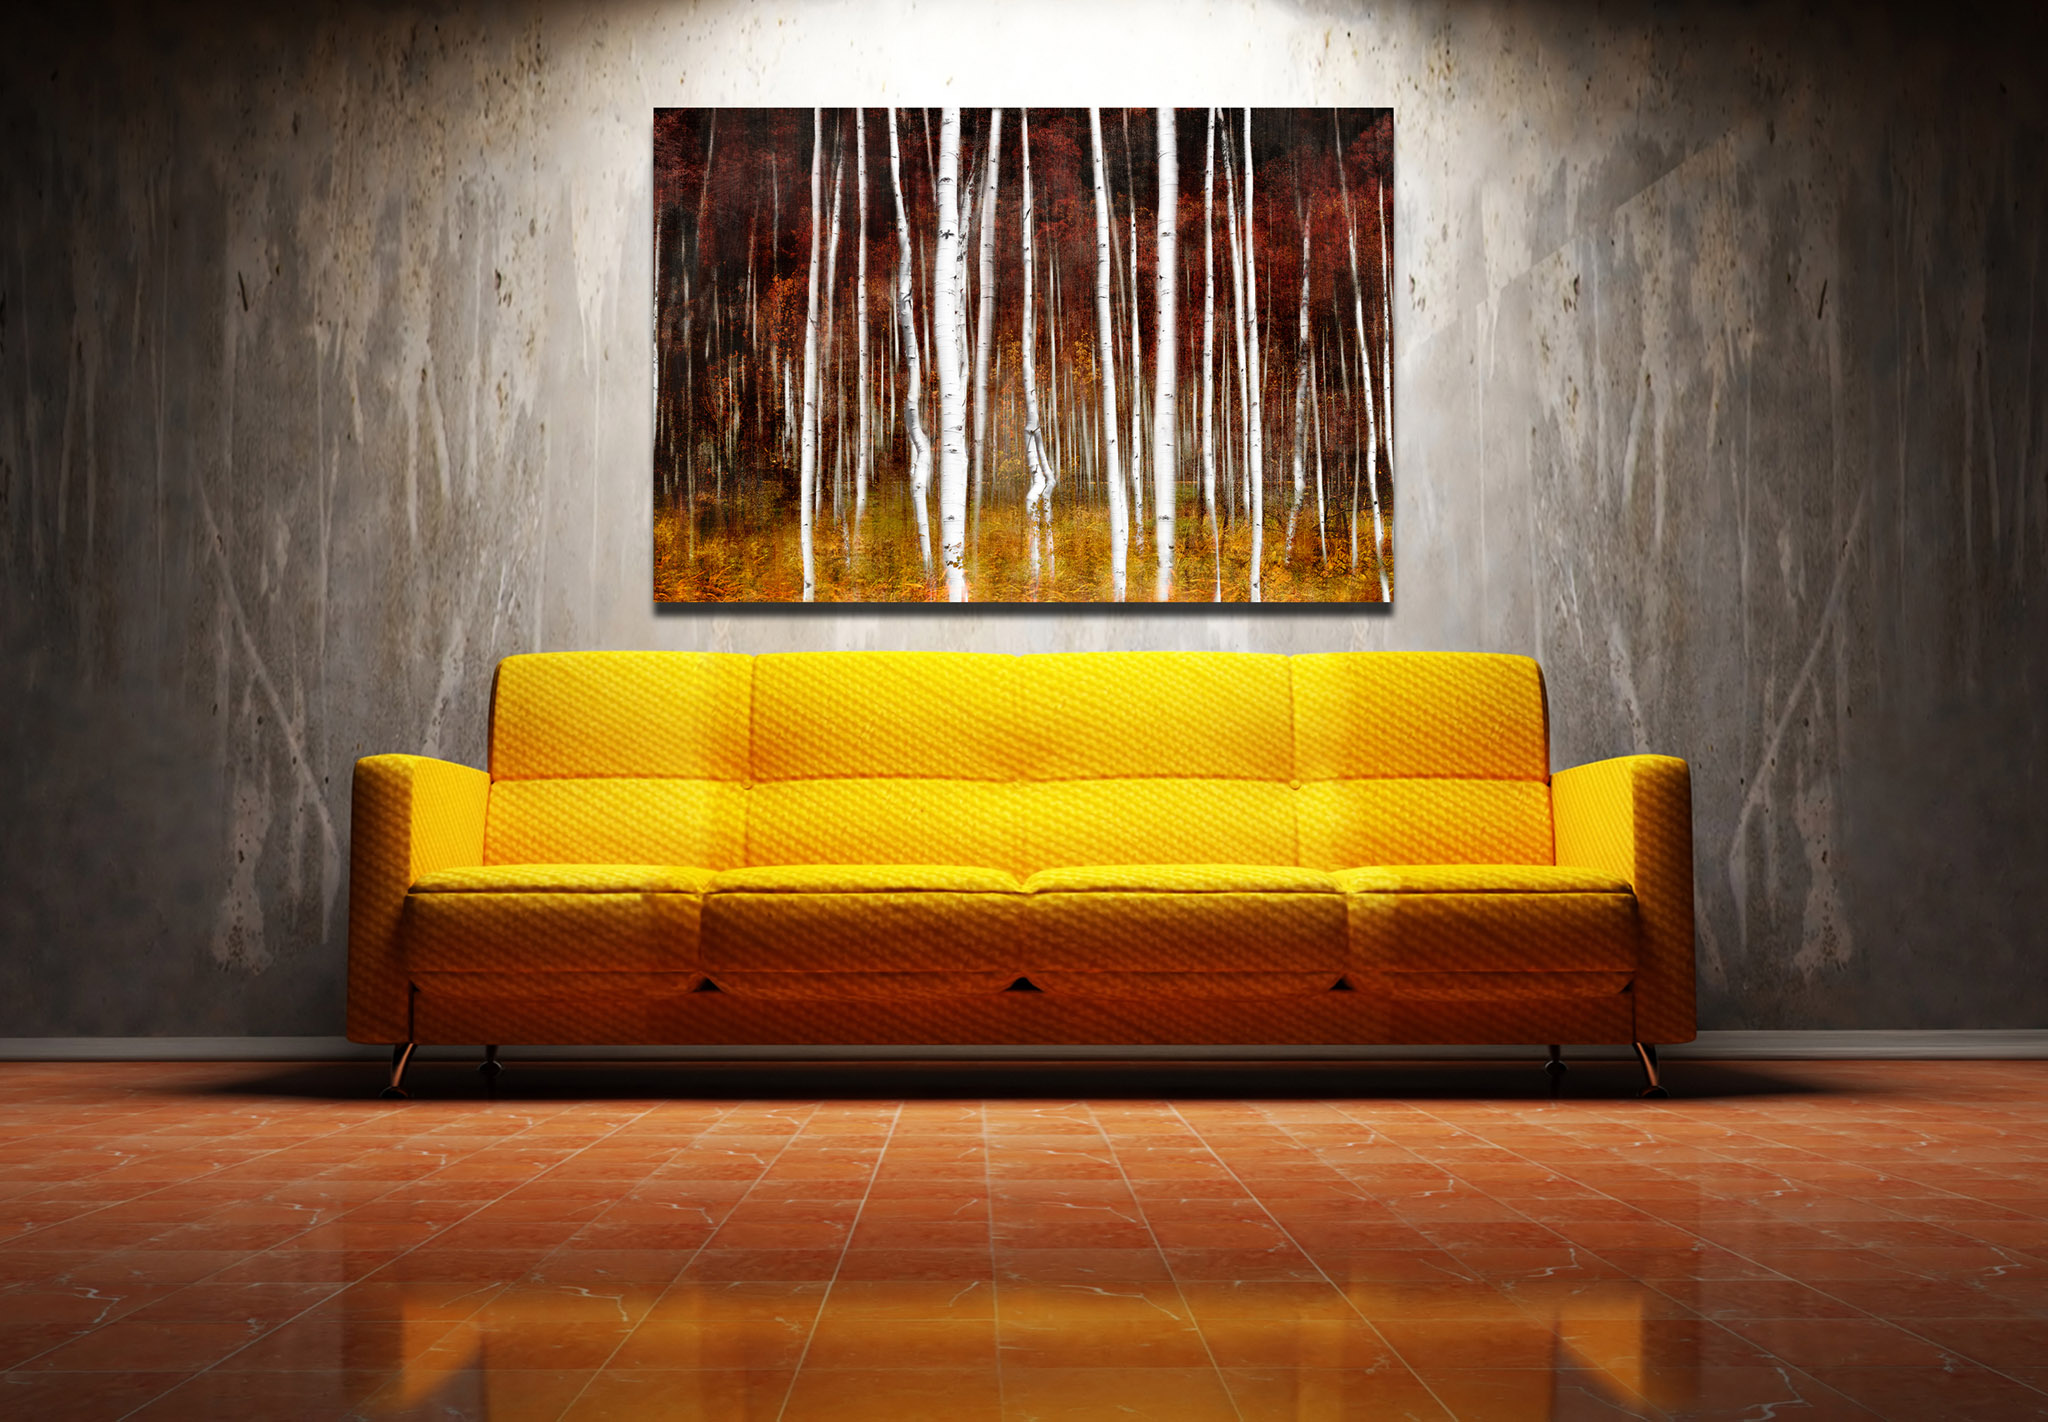 Fall Foliage artwork over couch.